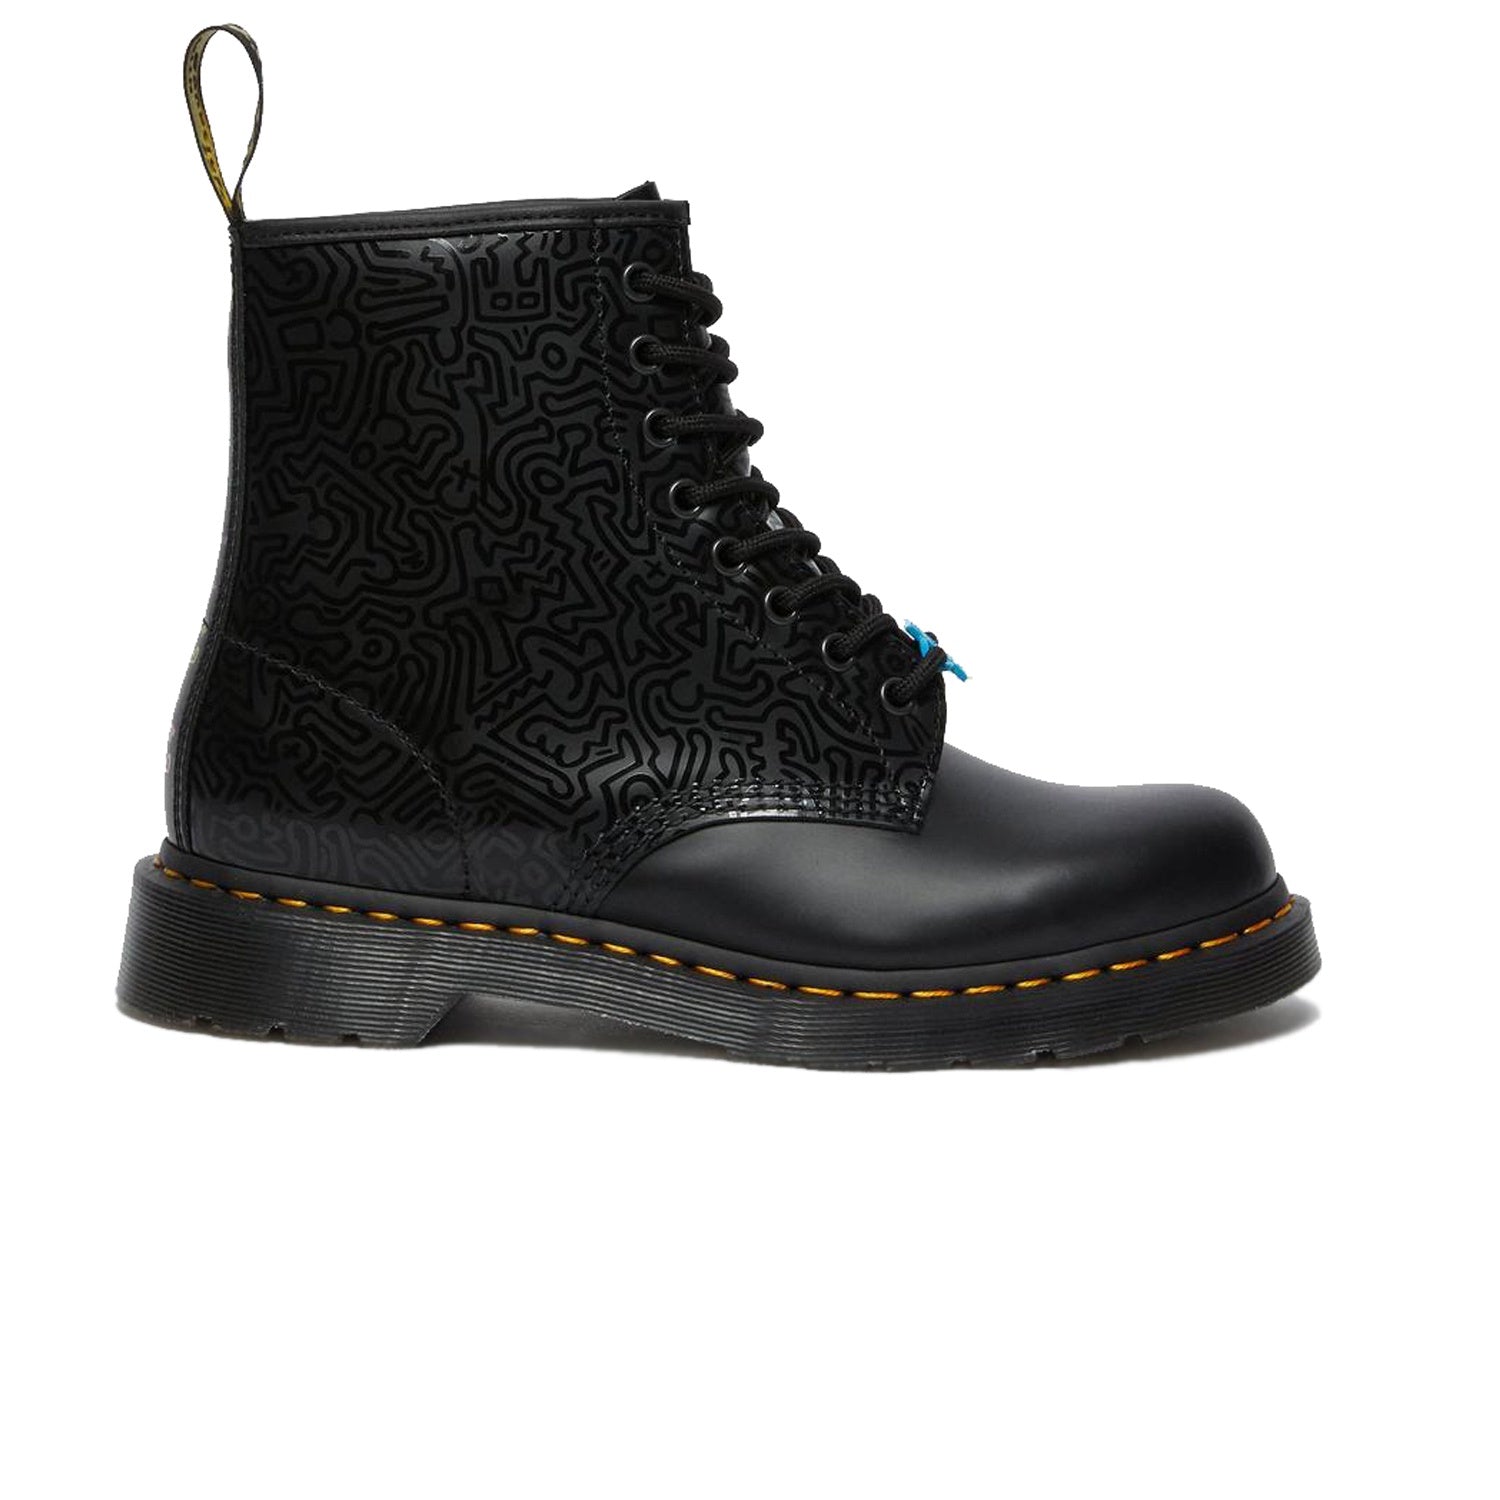 Dr. Martens 1460 Keith Haring Leather Ankle Boots Black Smooth